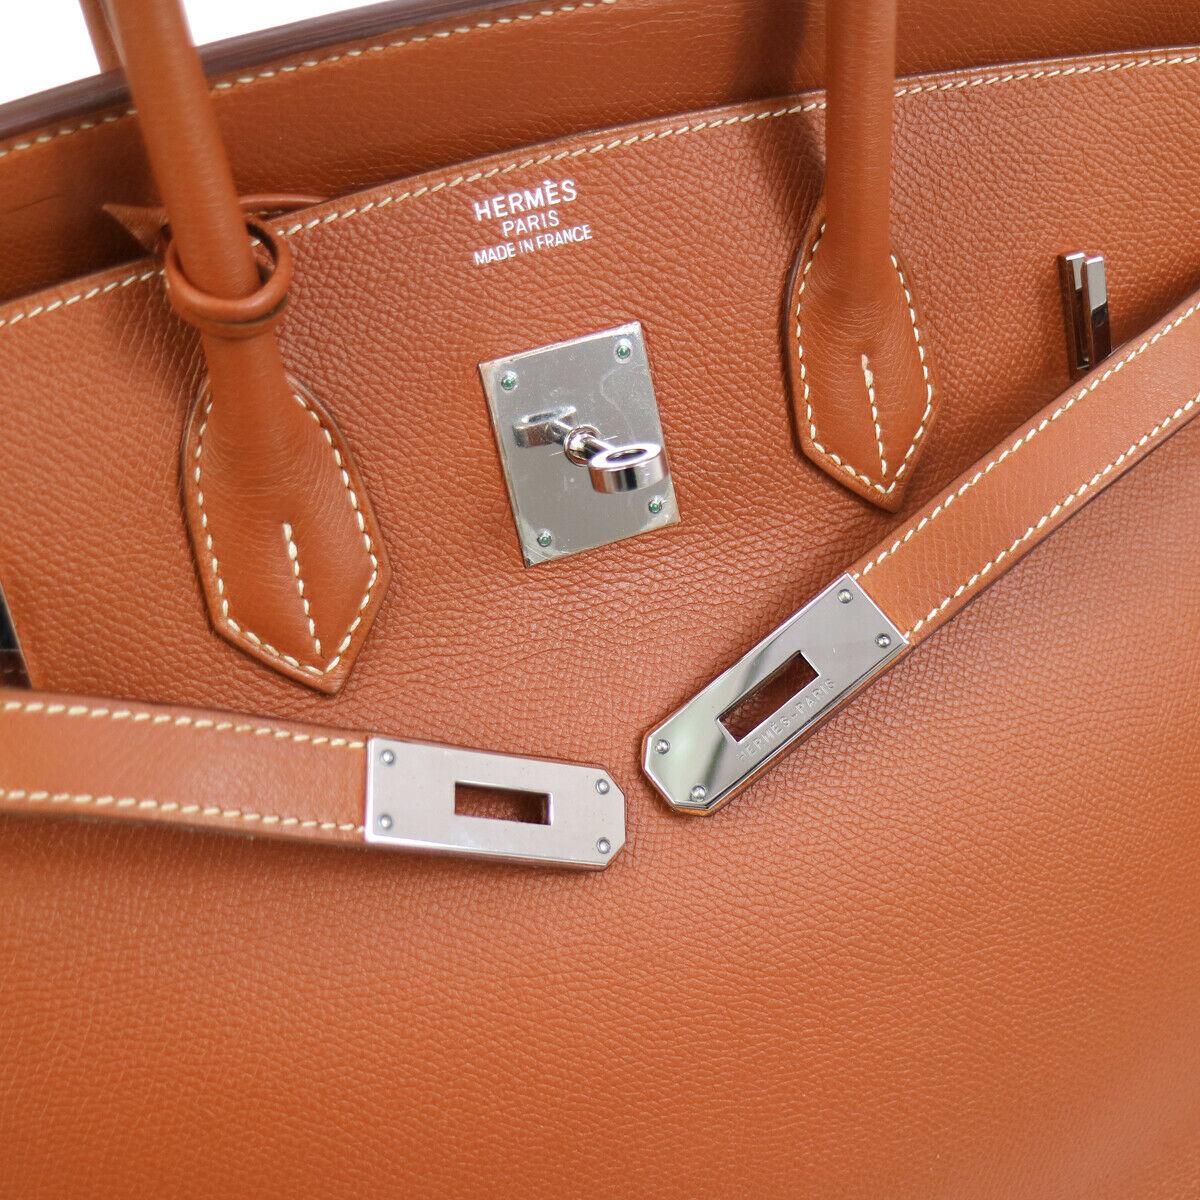 Hermes Birkin 35 Burnt Orange Red Leather Silver Carryall Travel Top Handle Satchel Tote

Leather
Palladium tone hardware
Leather lining
Date code present
Made in France
Handle drop 4.25